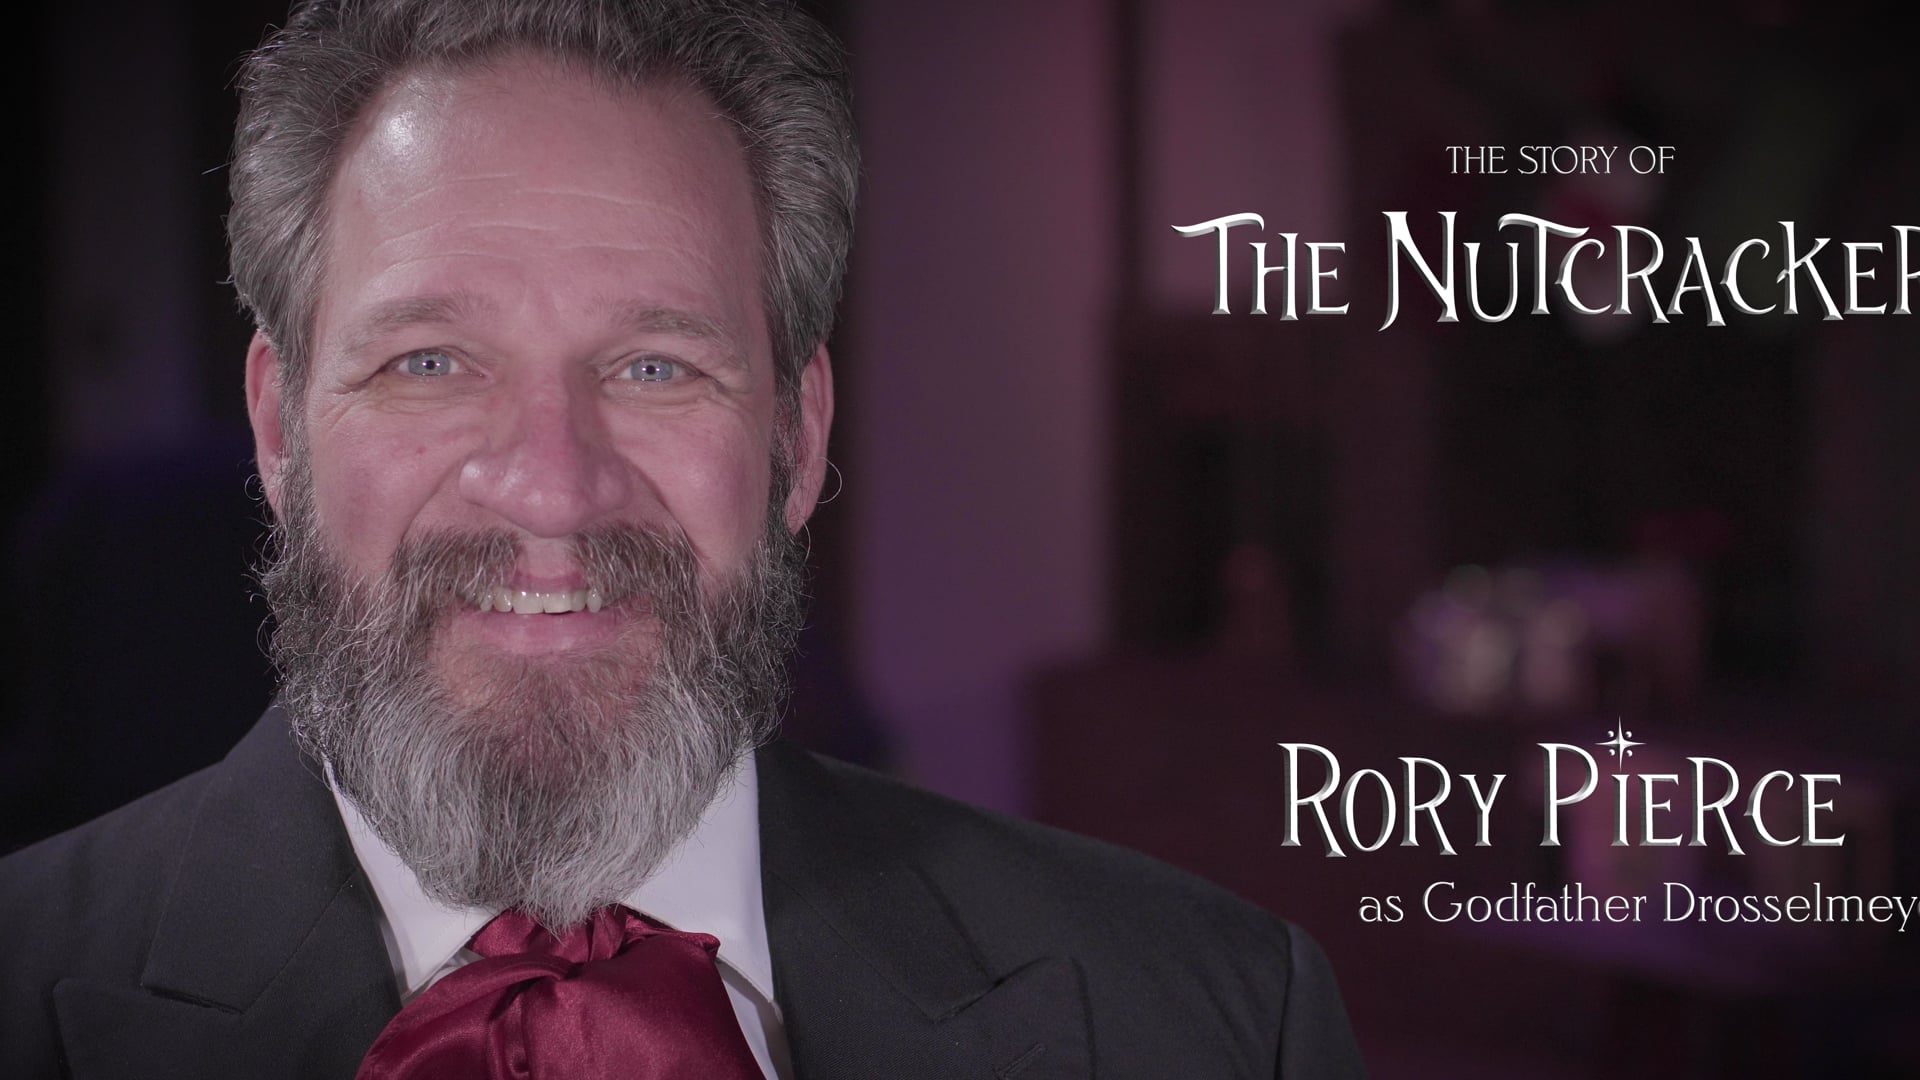 Meet the Cast of "The Story of the Nutcracker" (Rory Pierce as Godfather Drosselmeyer)